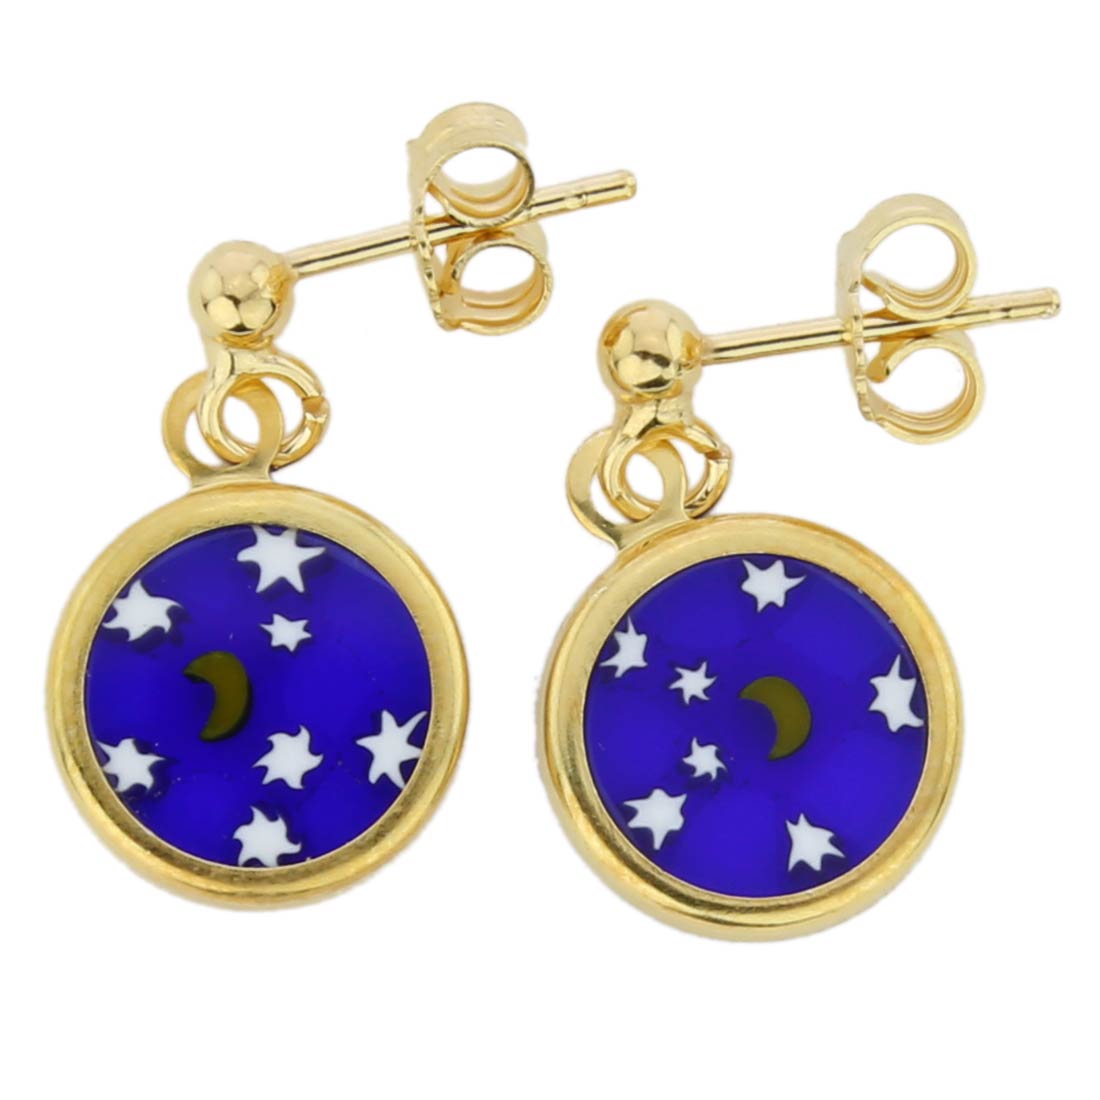 Millefiori Earrings in Gold-Plated Frame \"Starry Night\"